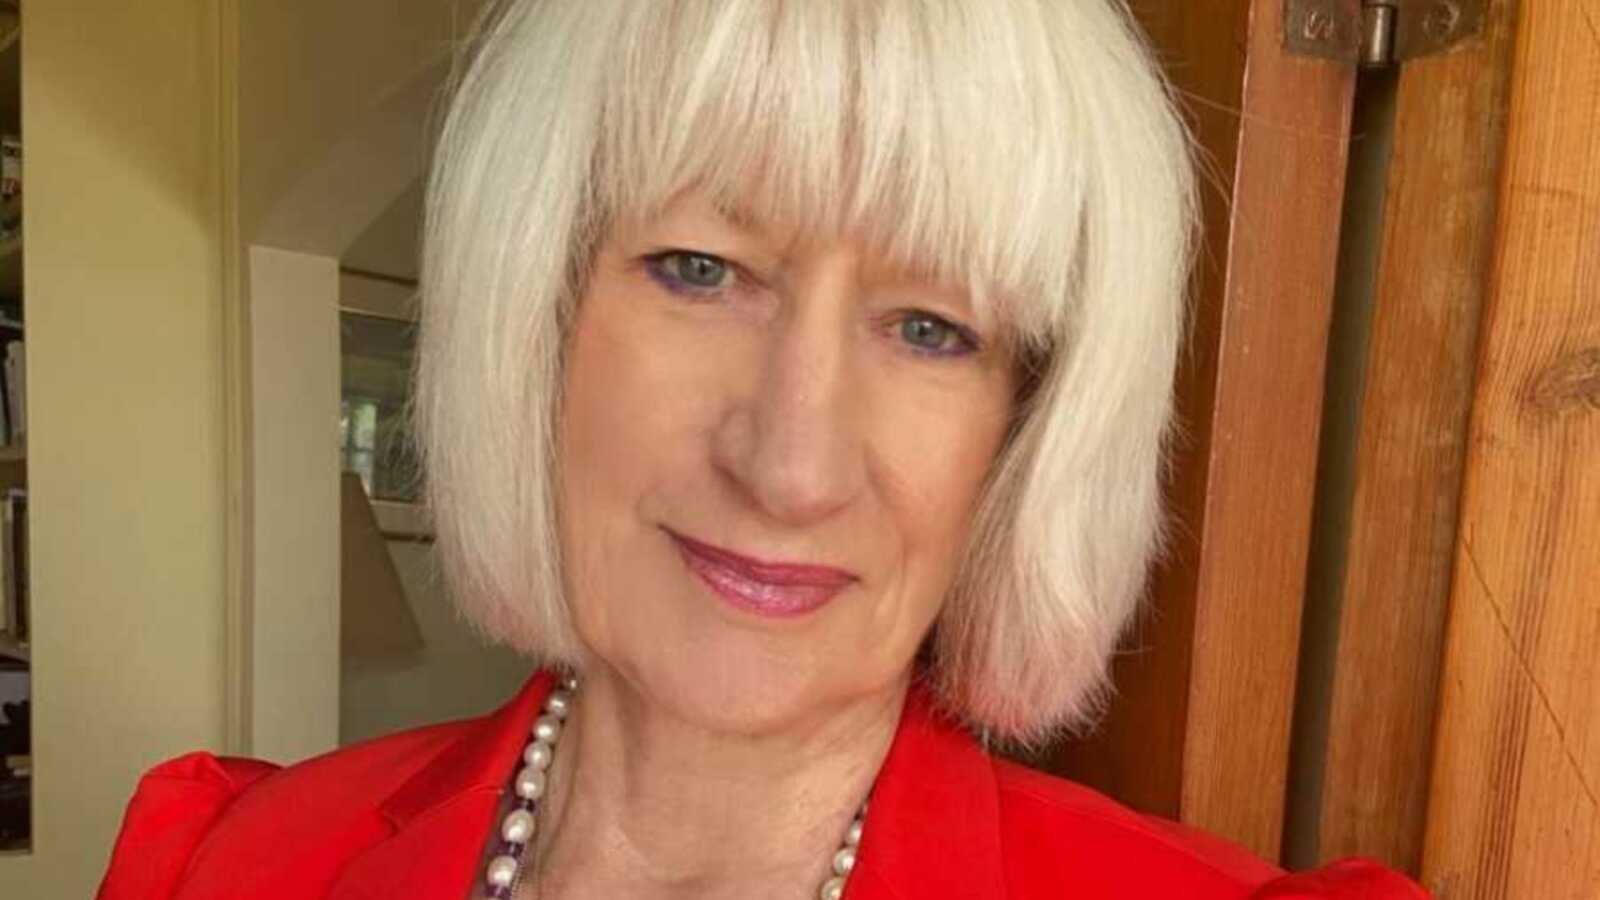 A woman with white hair wearing a red jacket